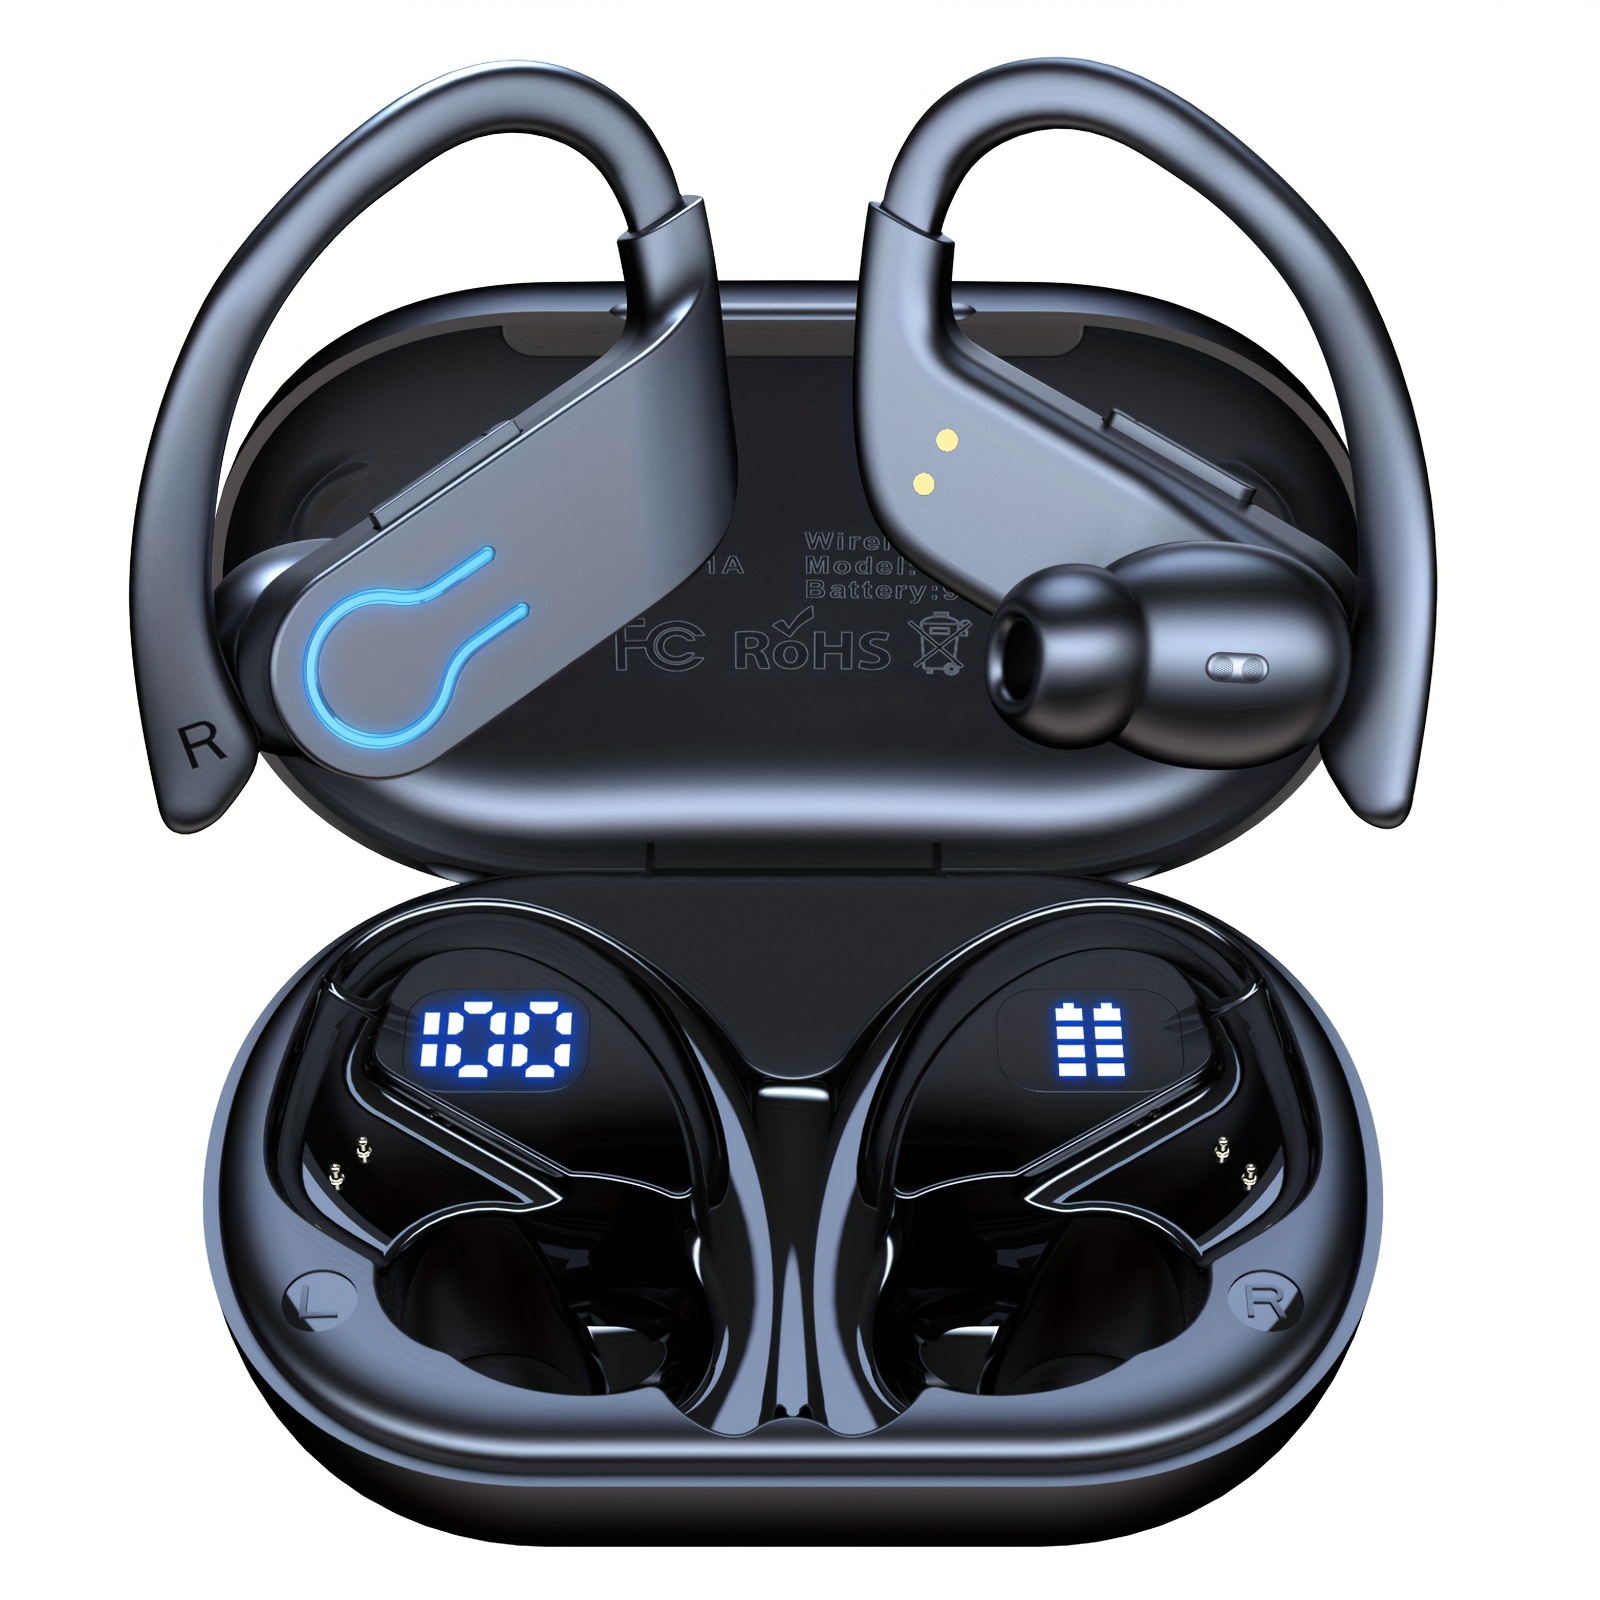 

Mozc Wireless Sports Earbuds 120 Hours Playback Time Hifi Sound Quality Earbuds For Sports, Charging Case With Led Display, Headphones For Running/exercising/traveling